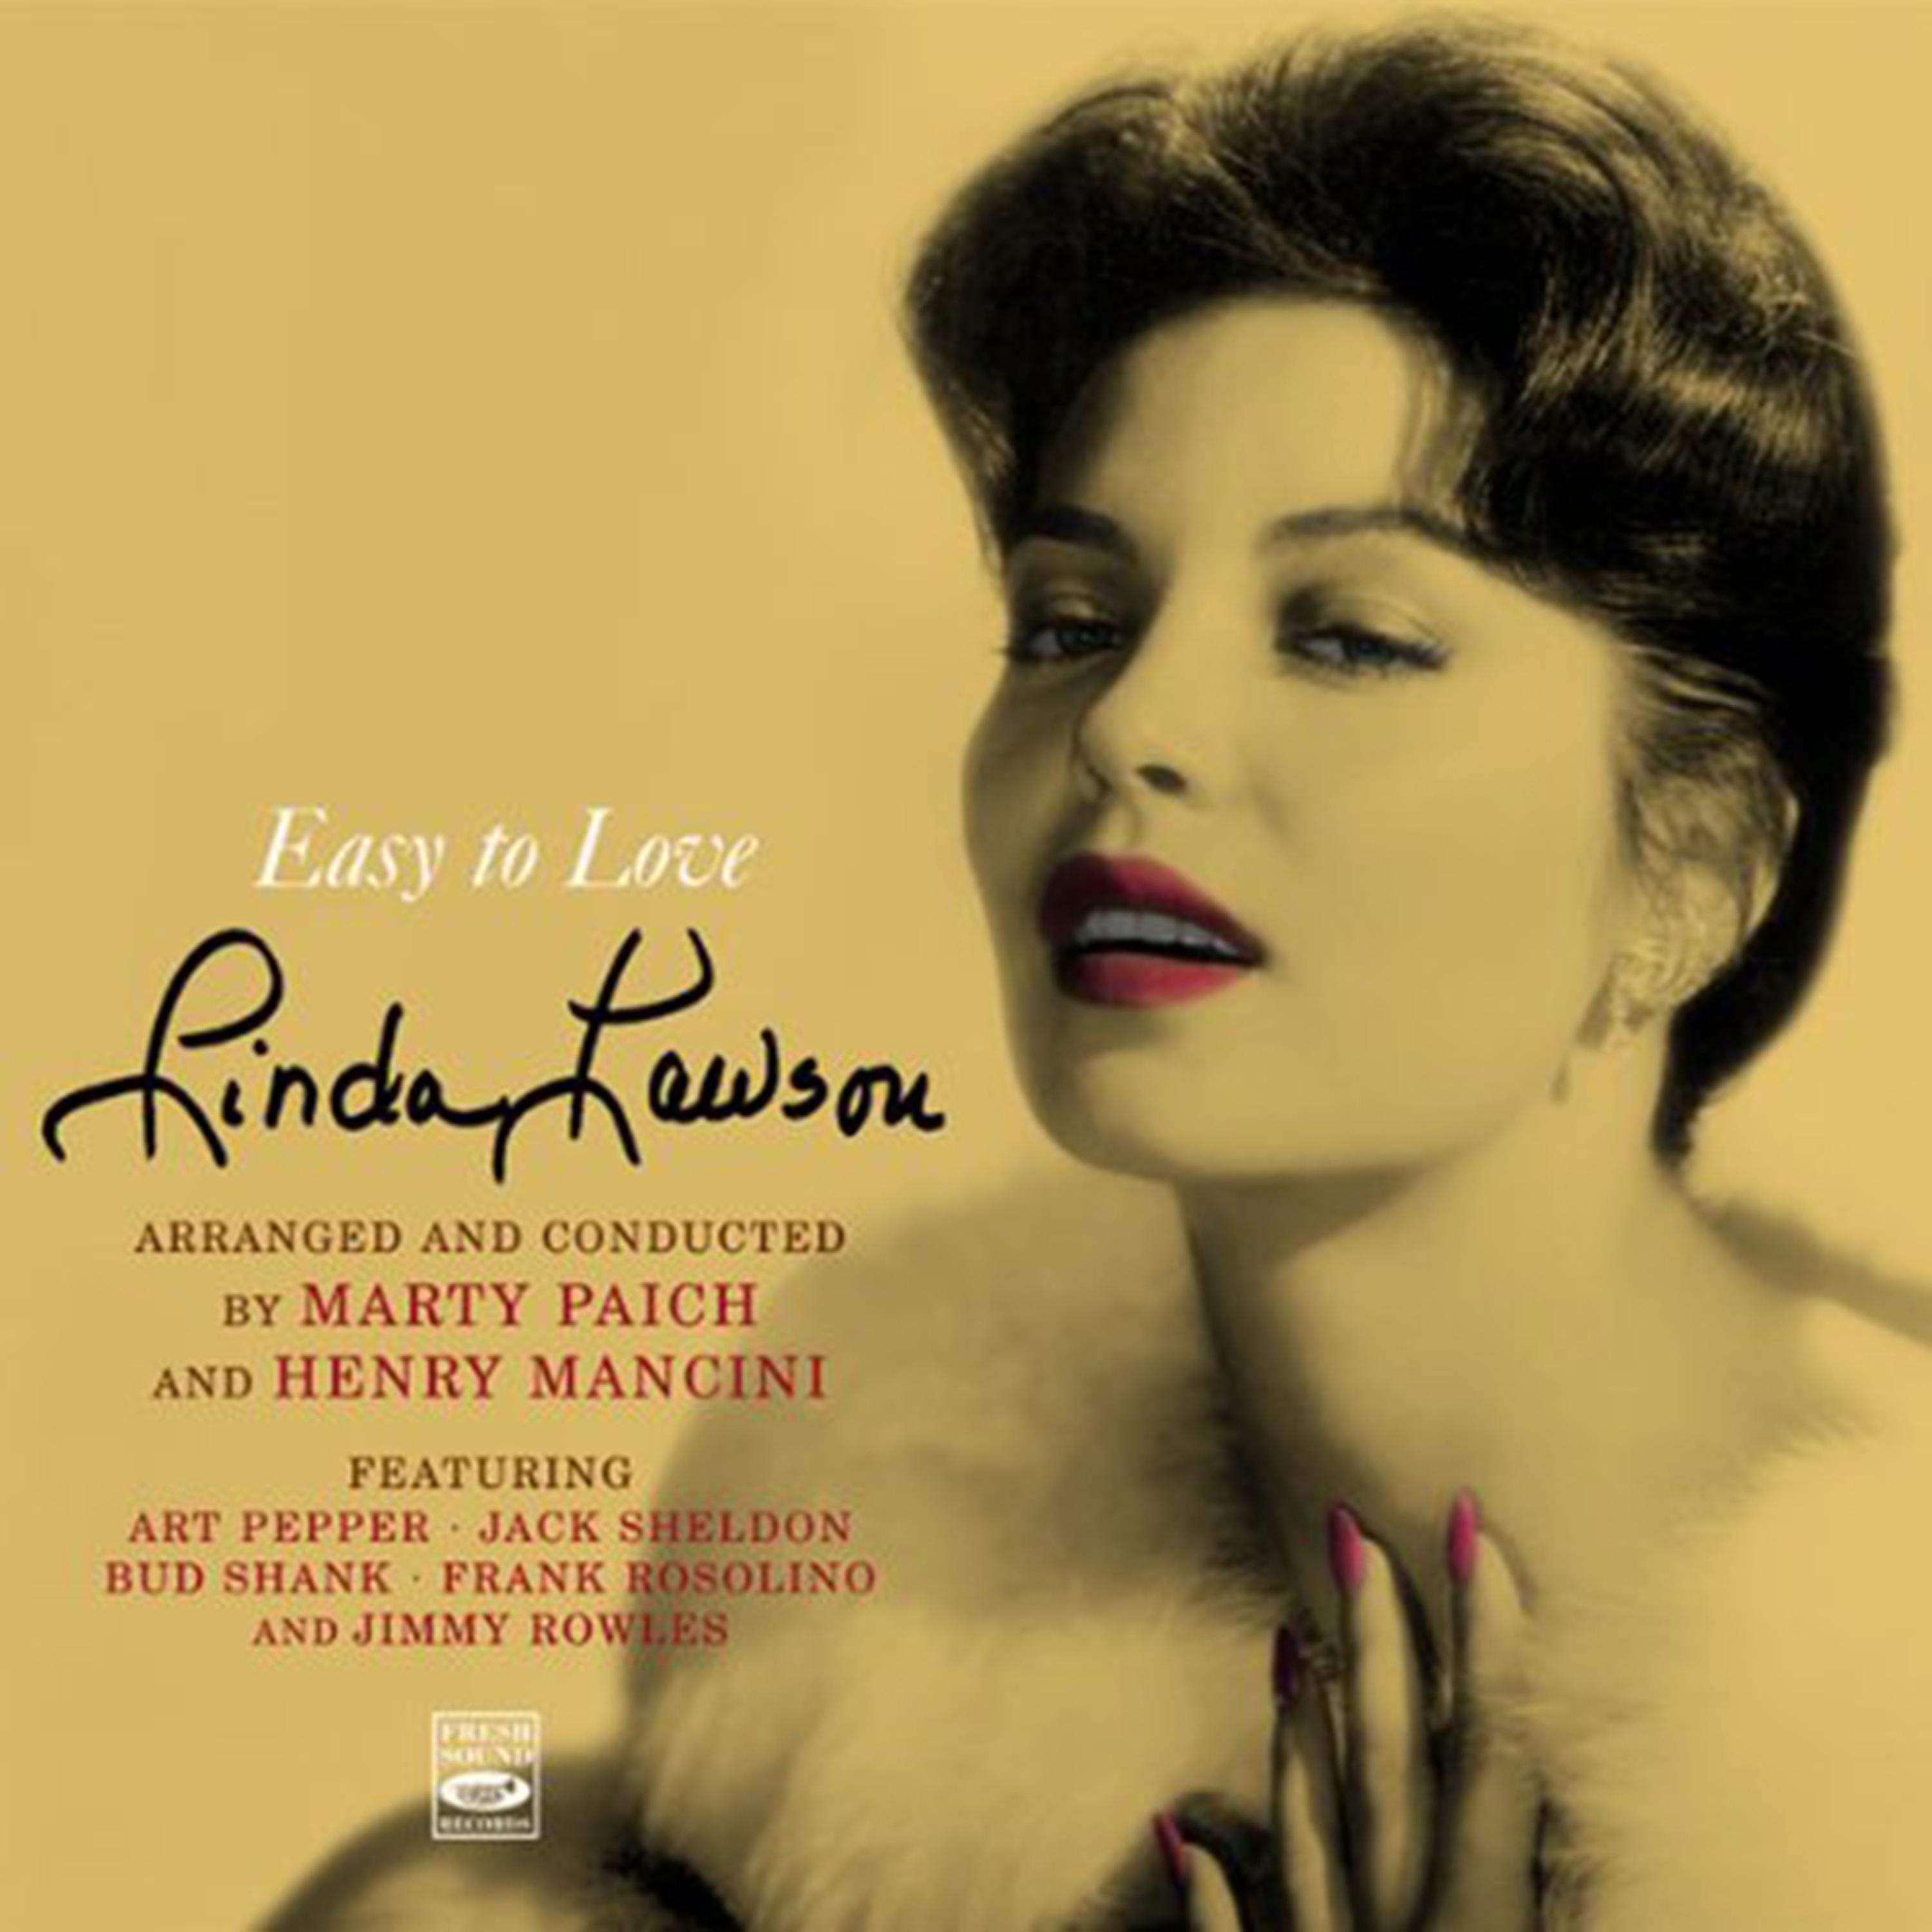 Постер альбома Linda Lawson. "Easy to Love". Arranged and Conducted by Marty Paich and Henry Mancini. Includes Her Album Introducing